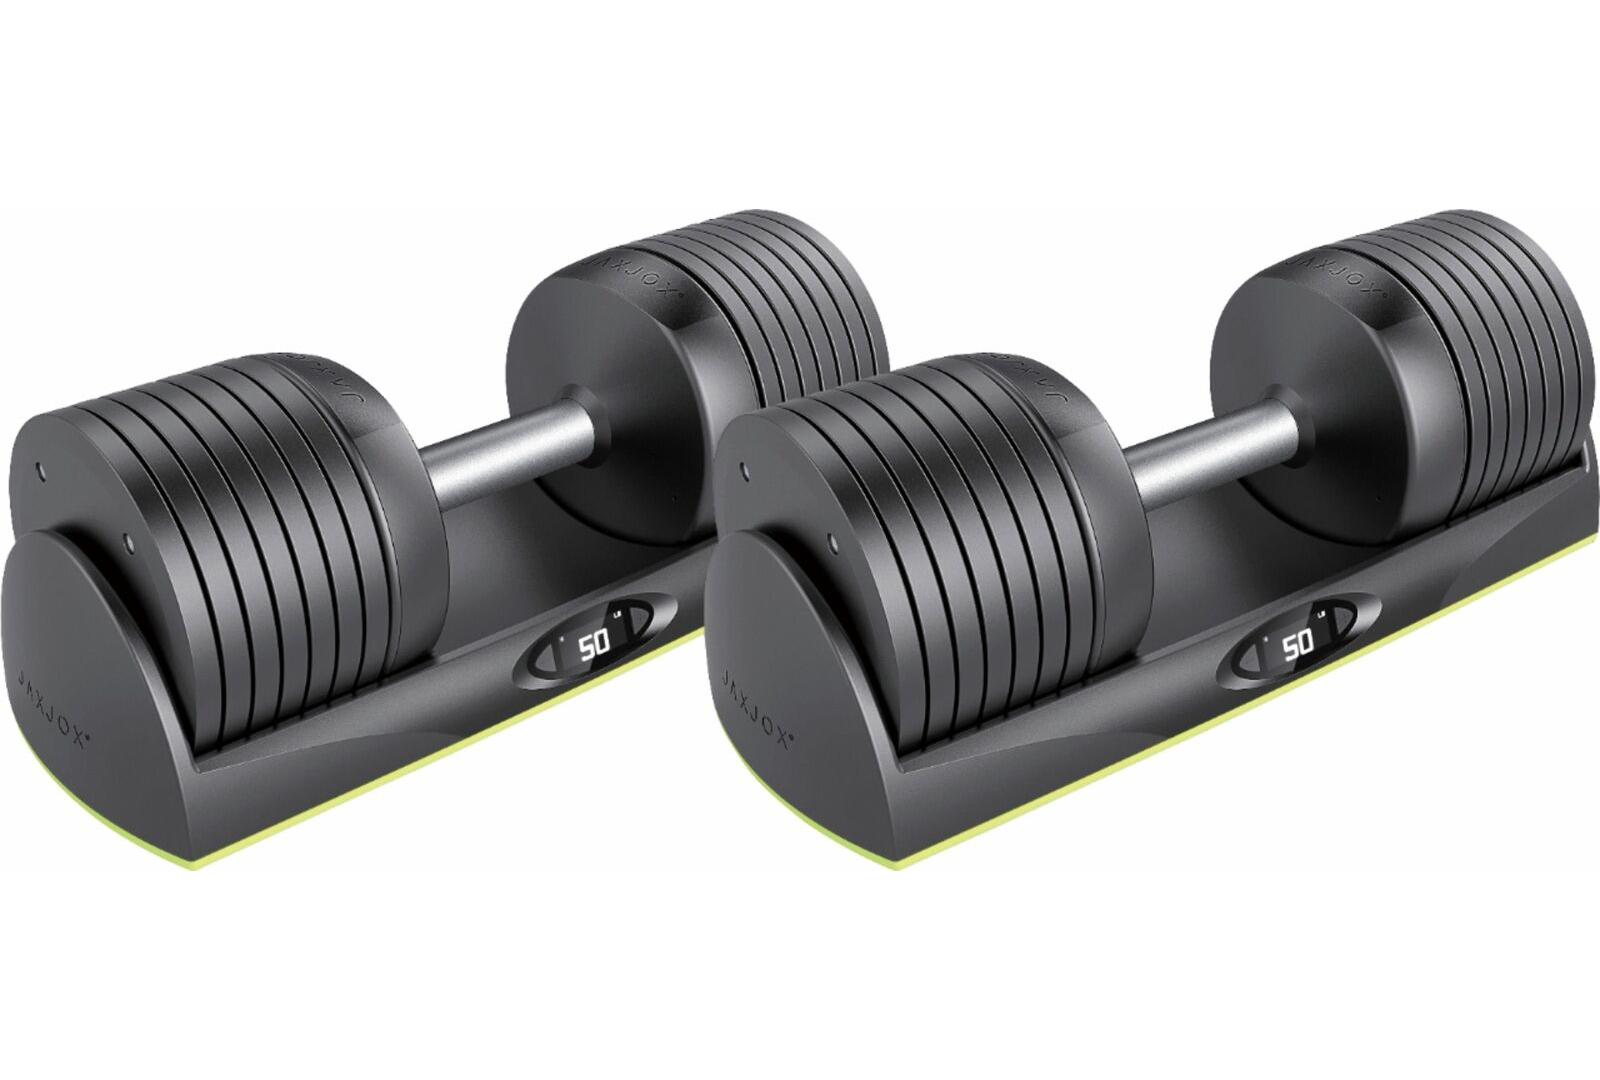 Jaxjox Adjustable Dumbbells for $199.99 Shipped